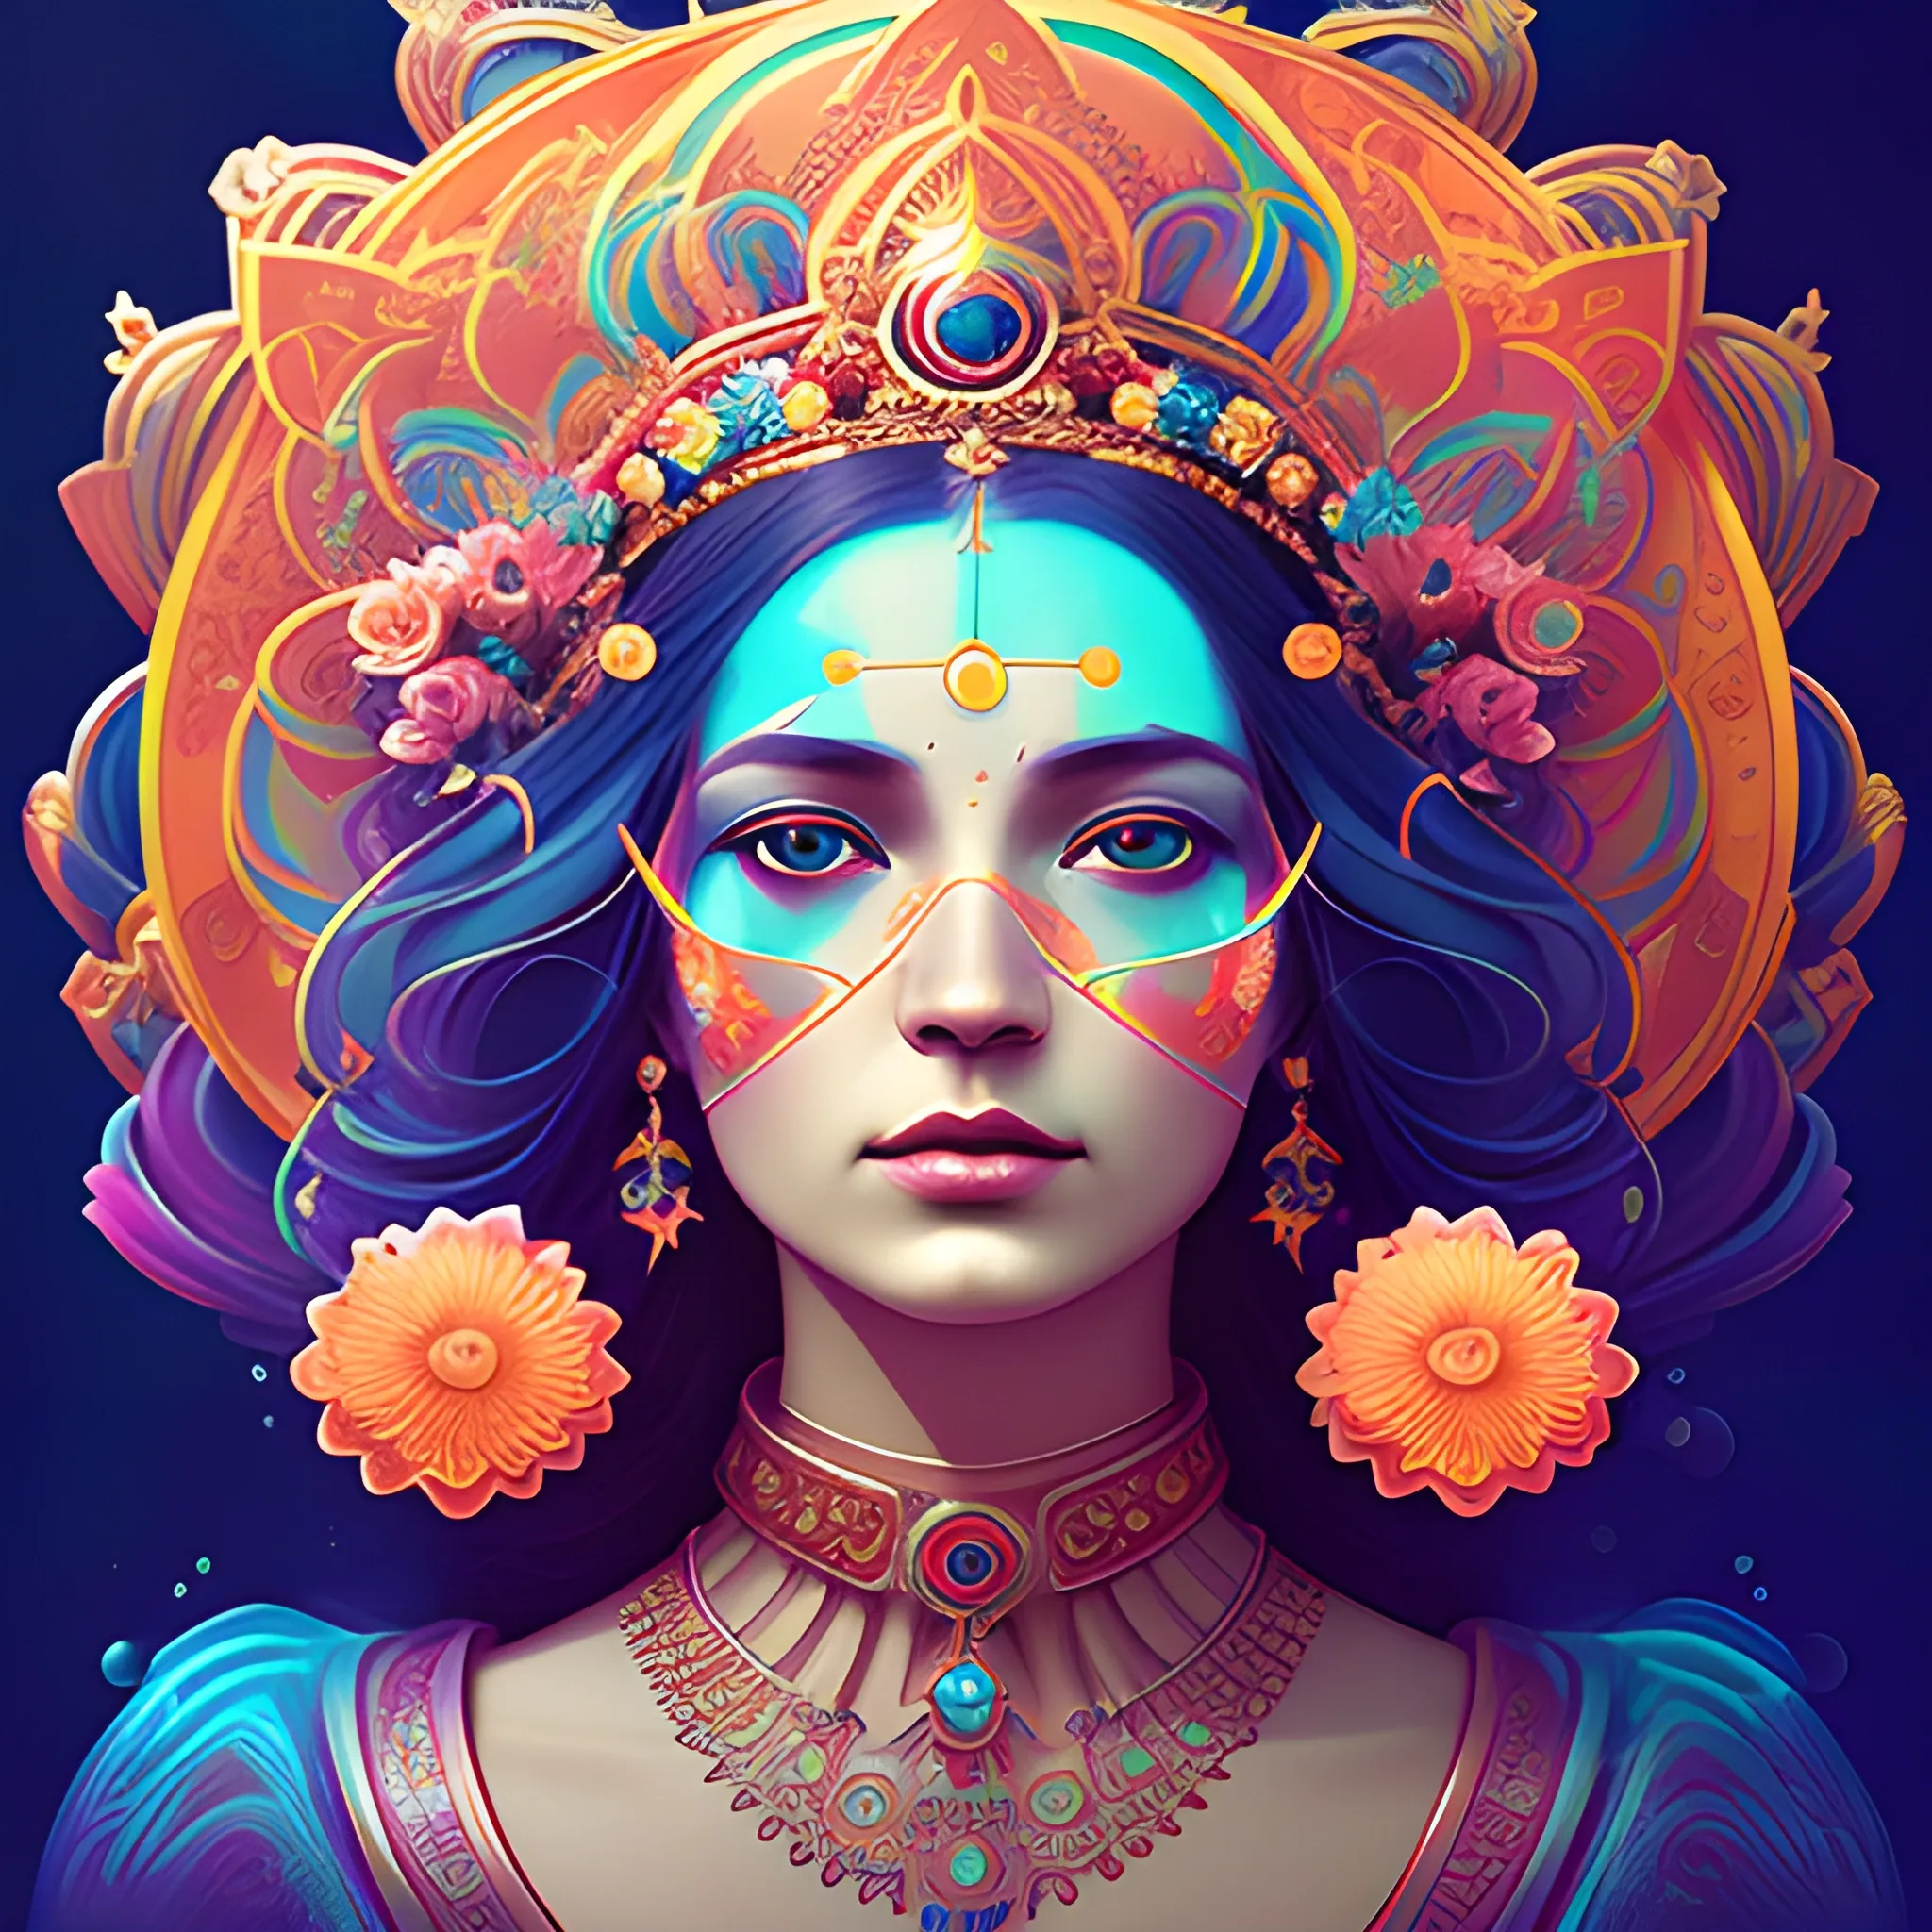 Flowery beautiful face empress or priestess with gold jewellery, by petros afshar, ross tran, Tom Bagshaw, tom whalen, underwater bubbly psychedelic clouds, Anaglyph 3D lens blur effect